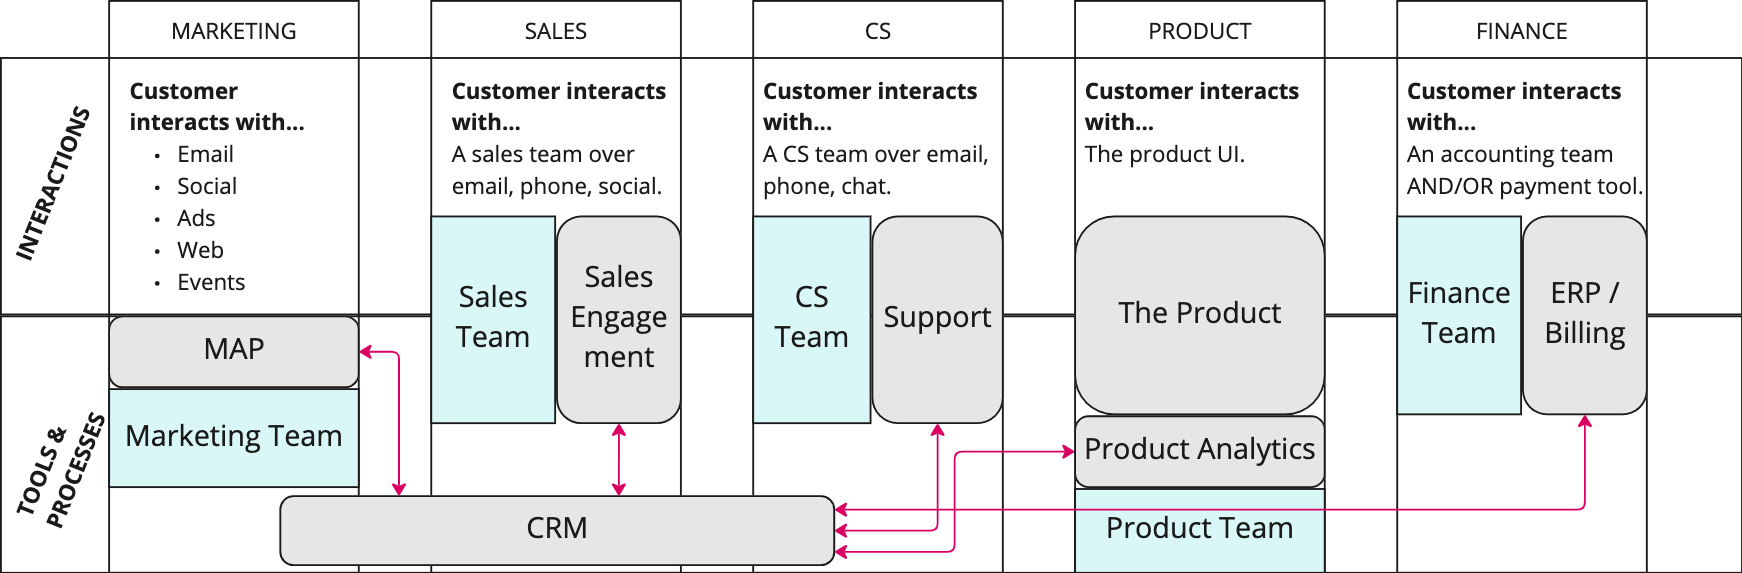 Customer Data Strategy Using CRM, In Theory